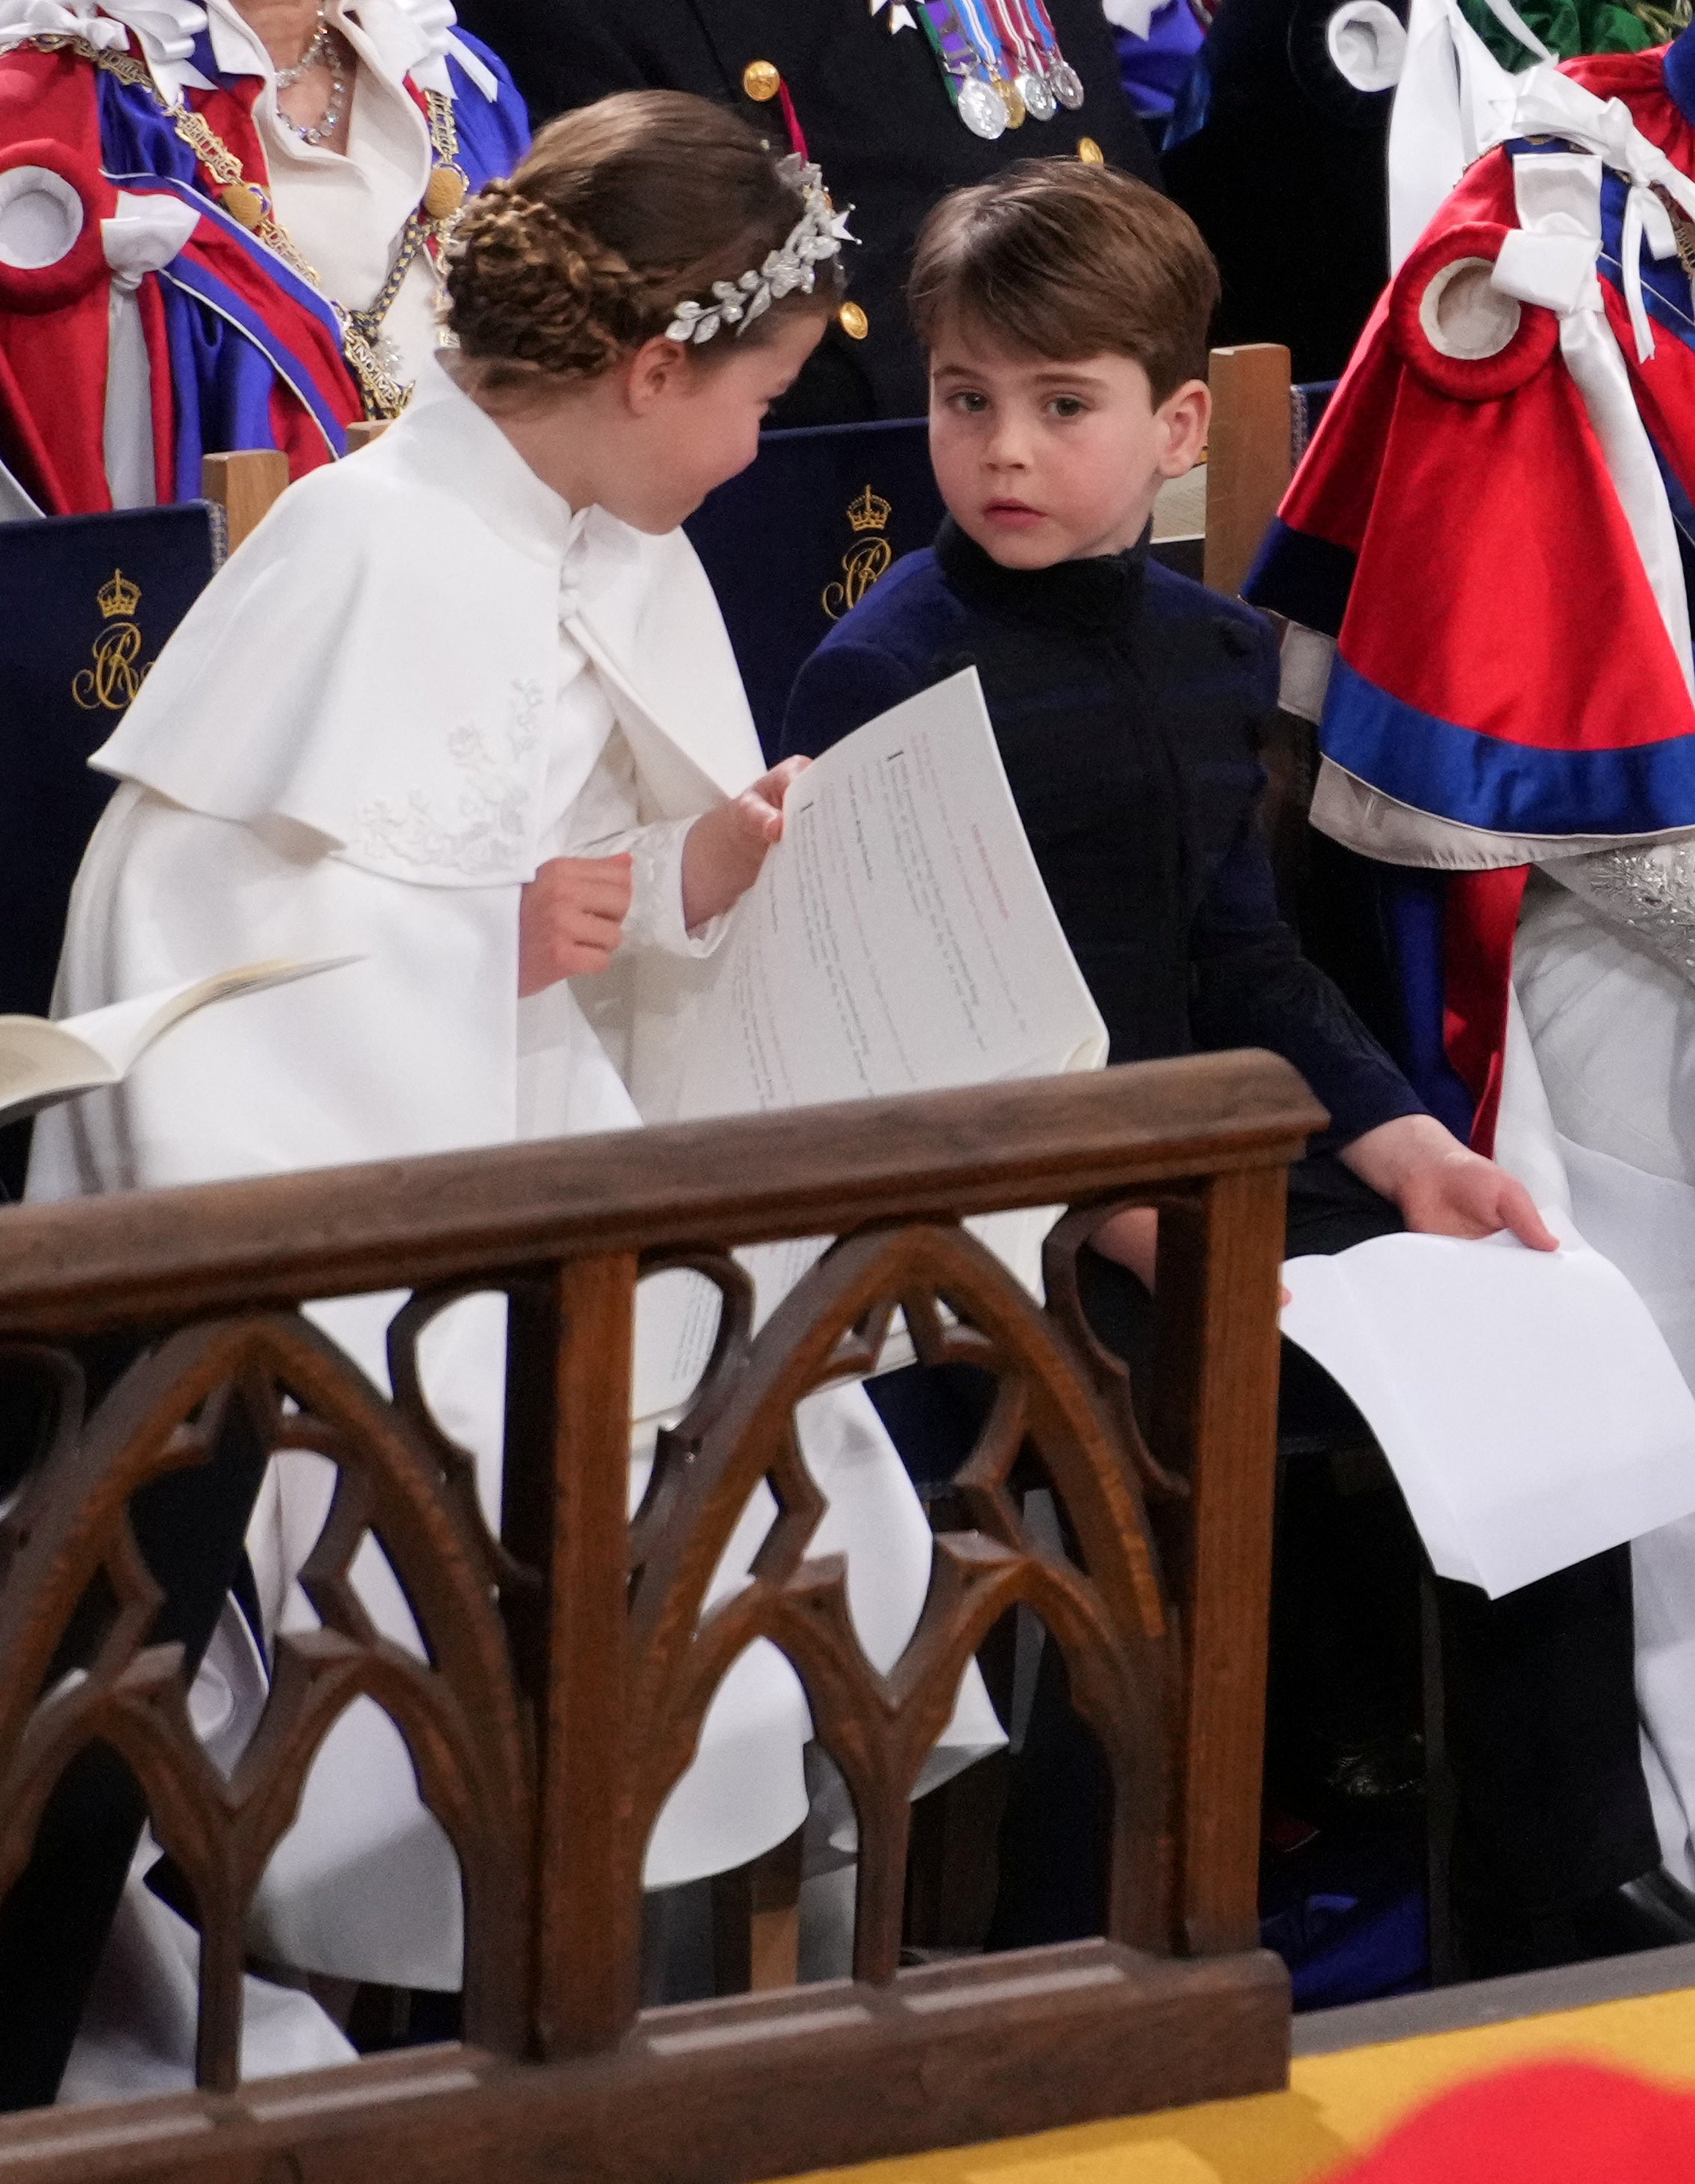 Princess Charlotte and Prince Louis at the coronation ceremony of King Charles III and Queen Camilla in Westminster Abbey